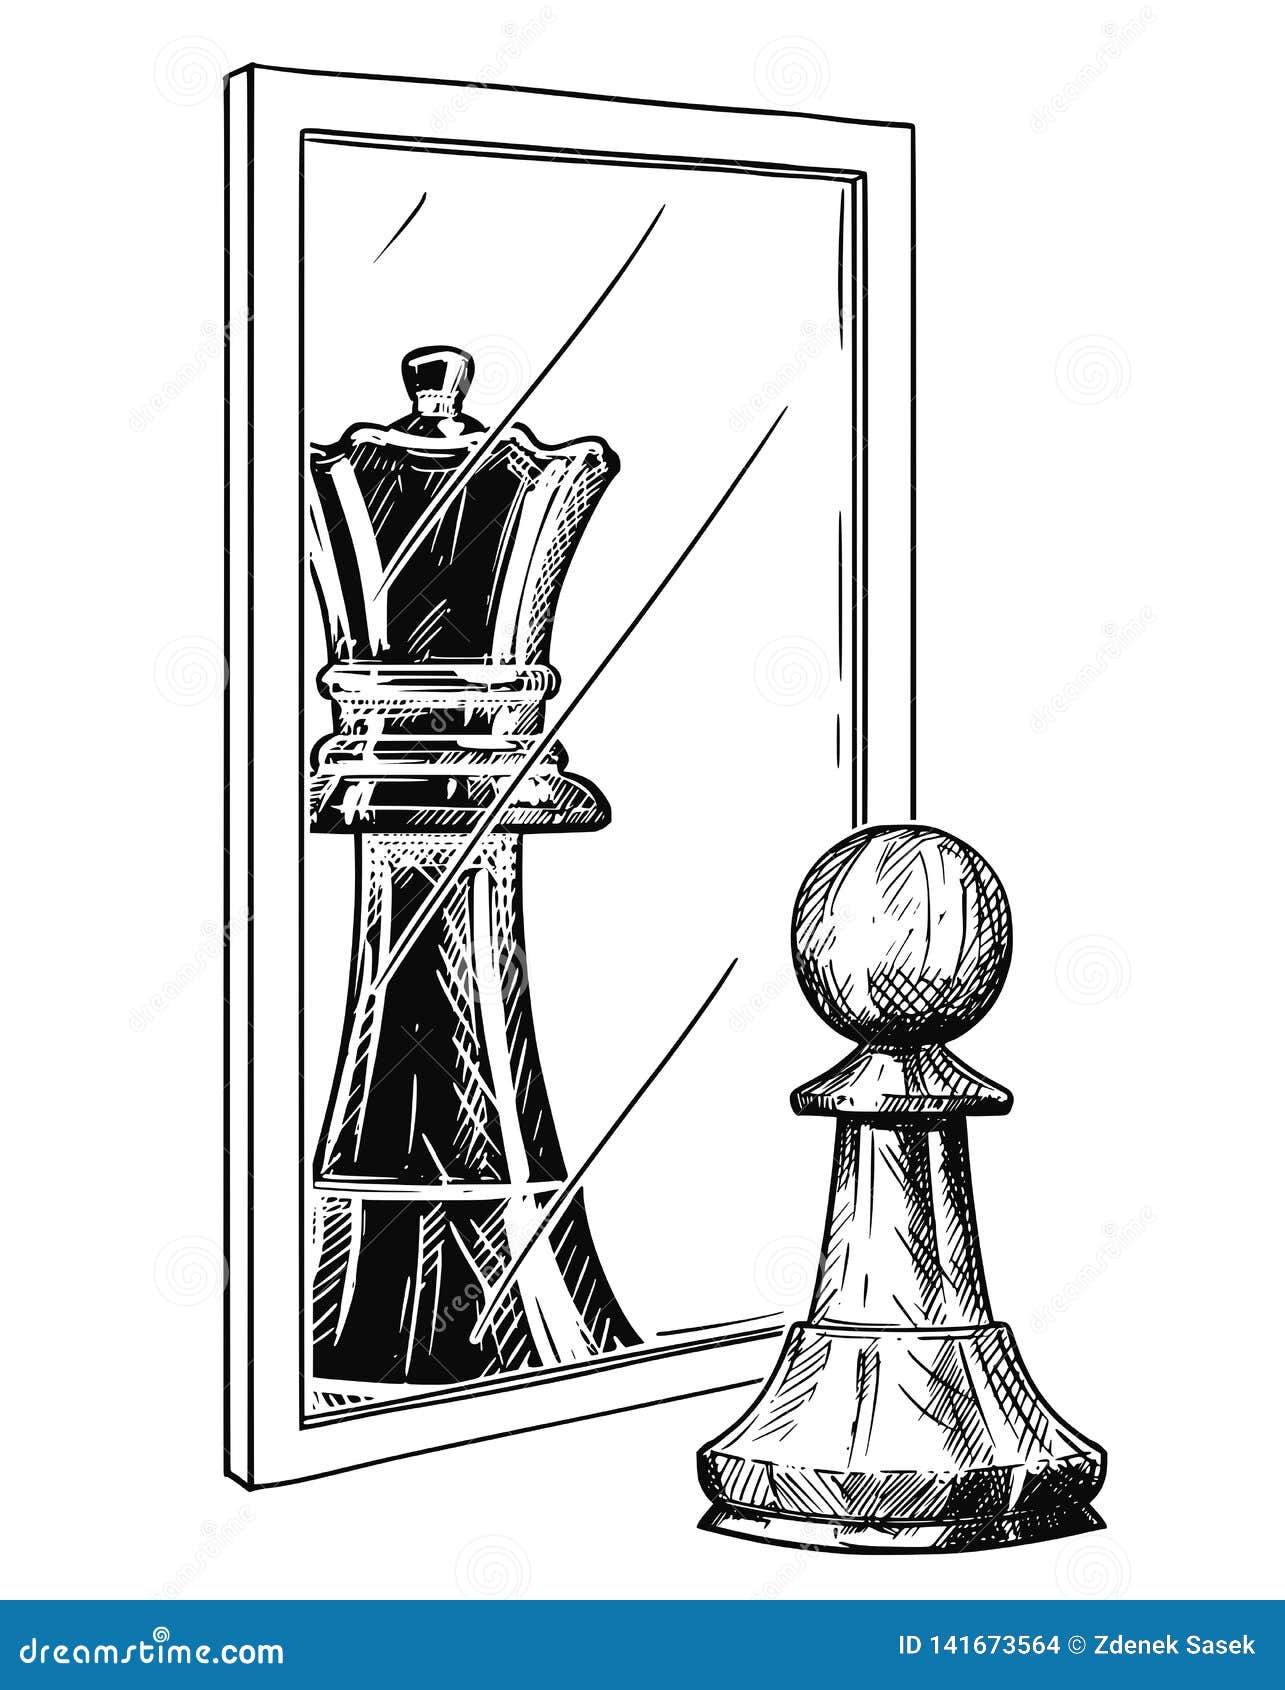 cartoon drawing of white chess pawn reflecting in mirror as black king, confidence metaphor